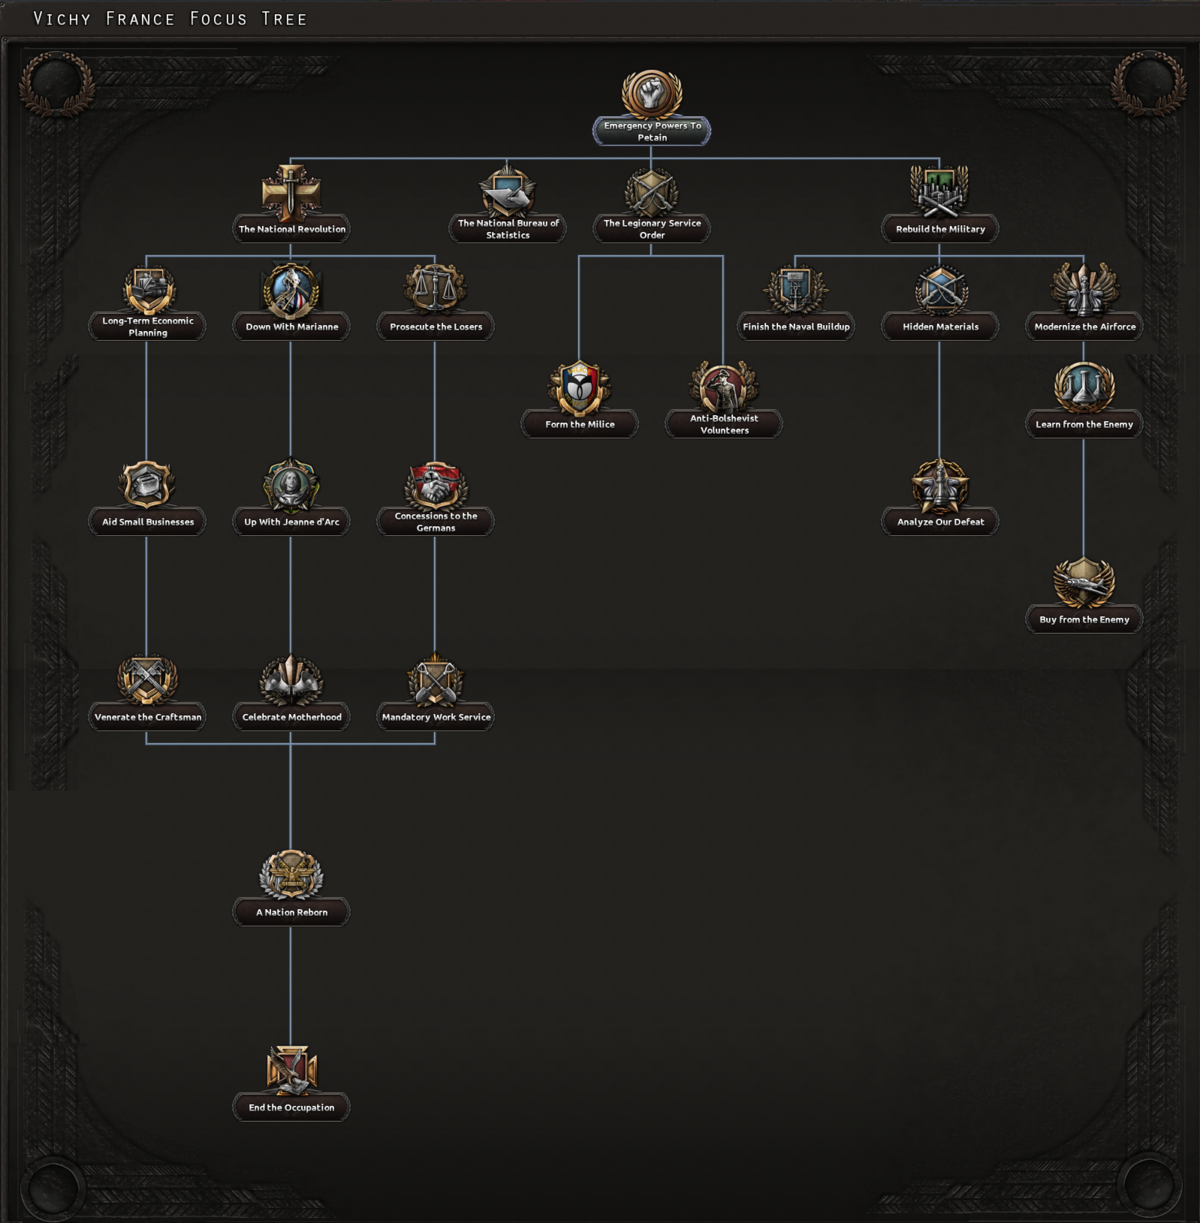 NF tree France Vichy.png